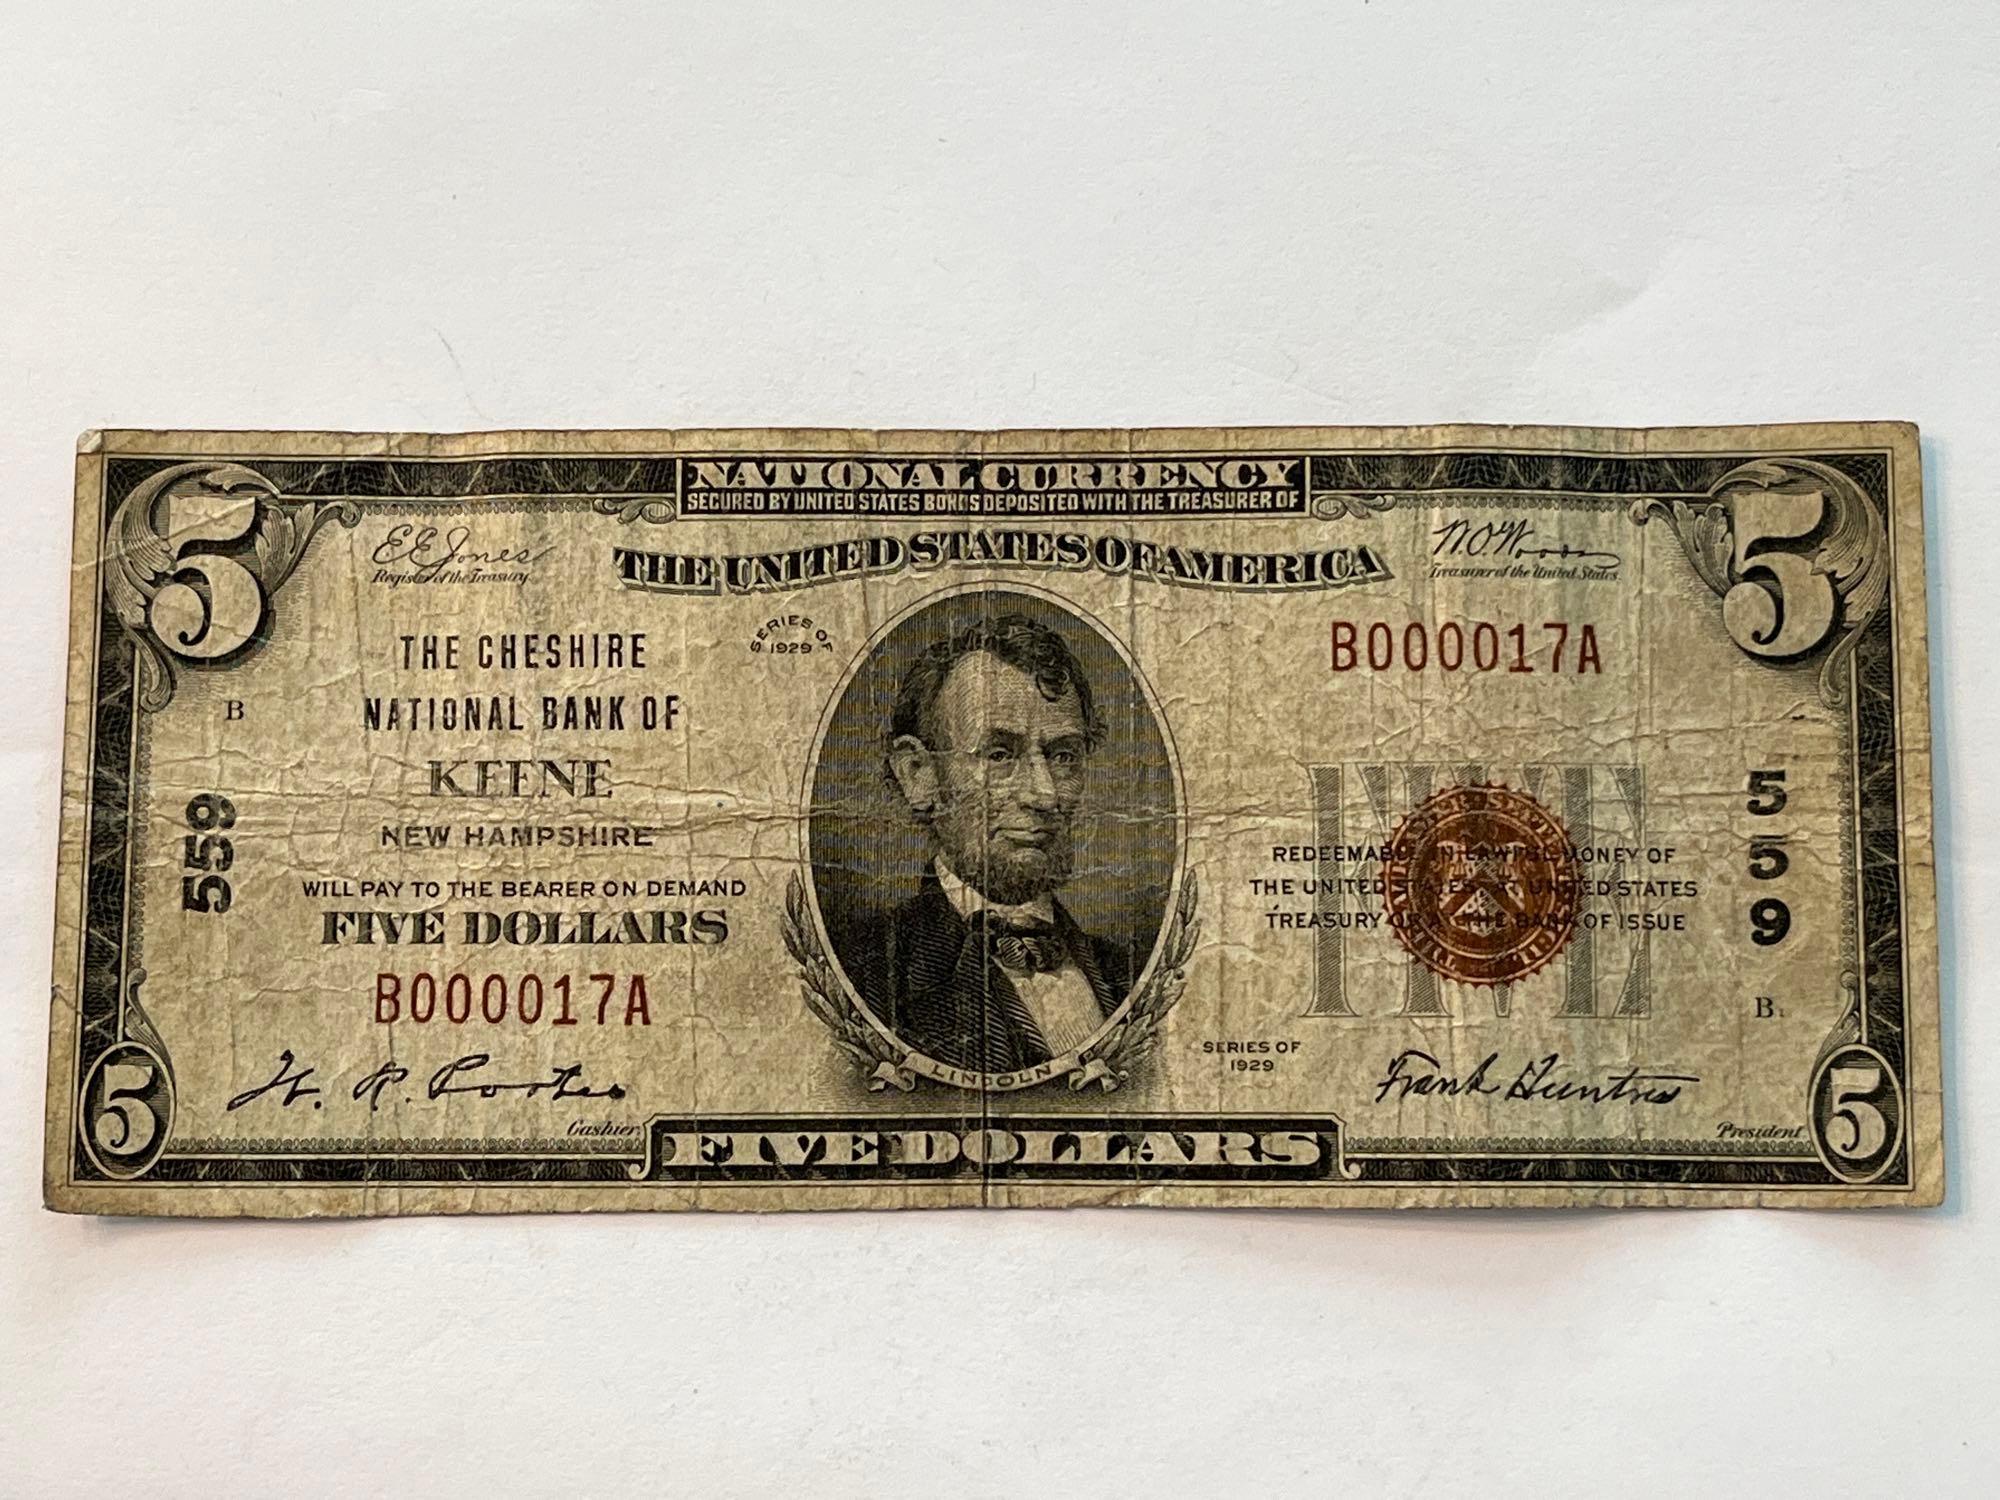 1929 Series $50 Federal Reserve National Bank Note Fine